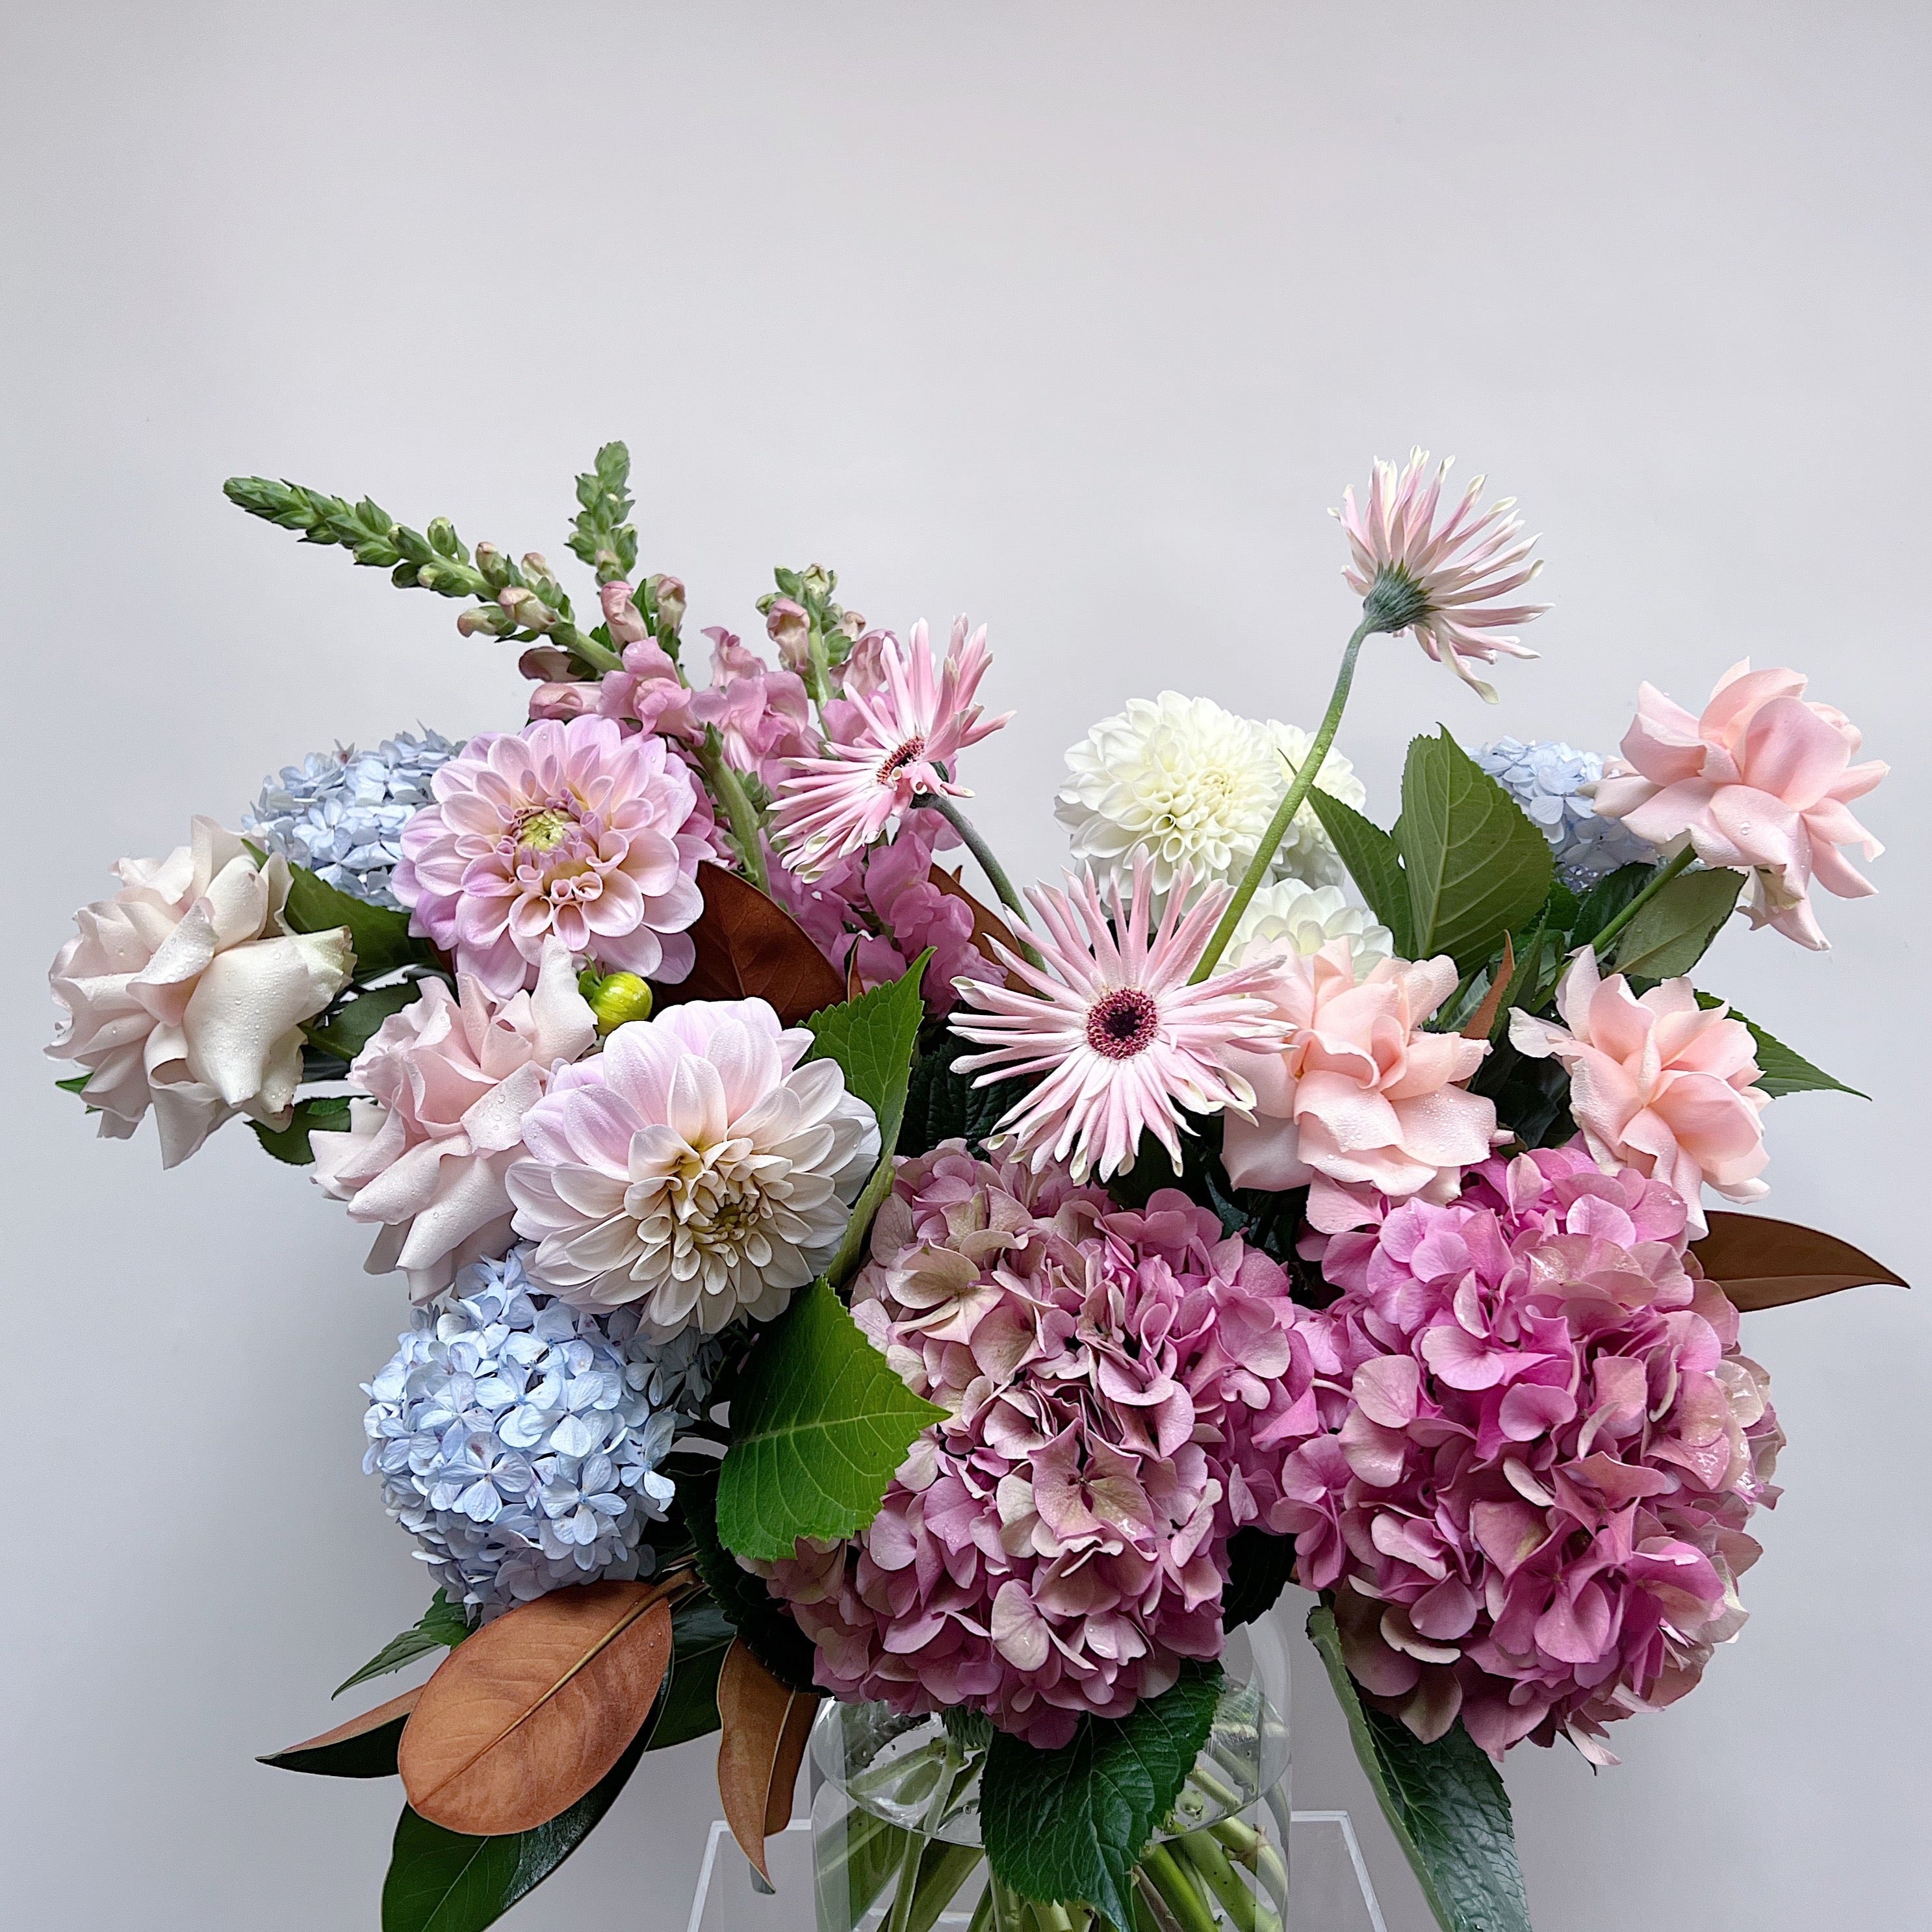 We've Got This! Customise your bouquet...